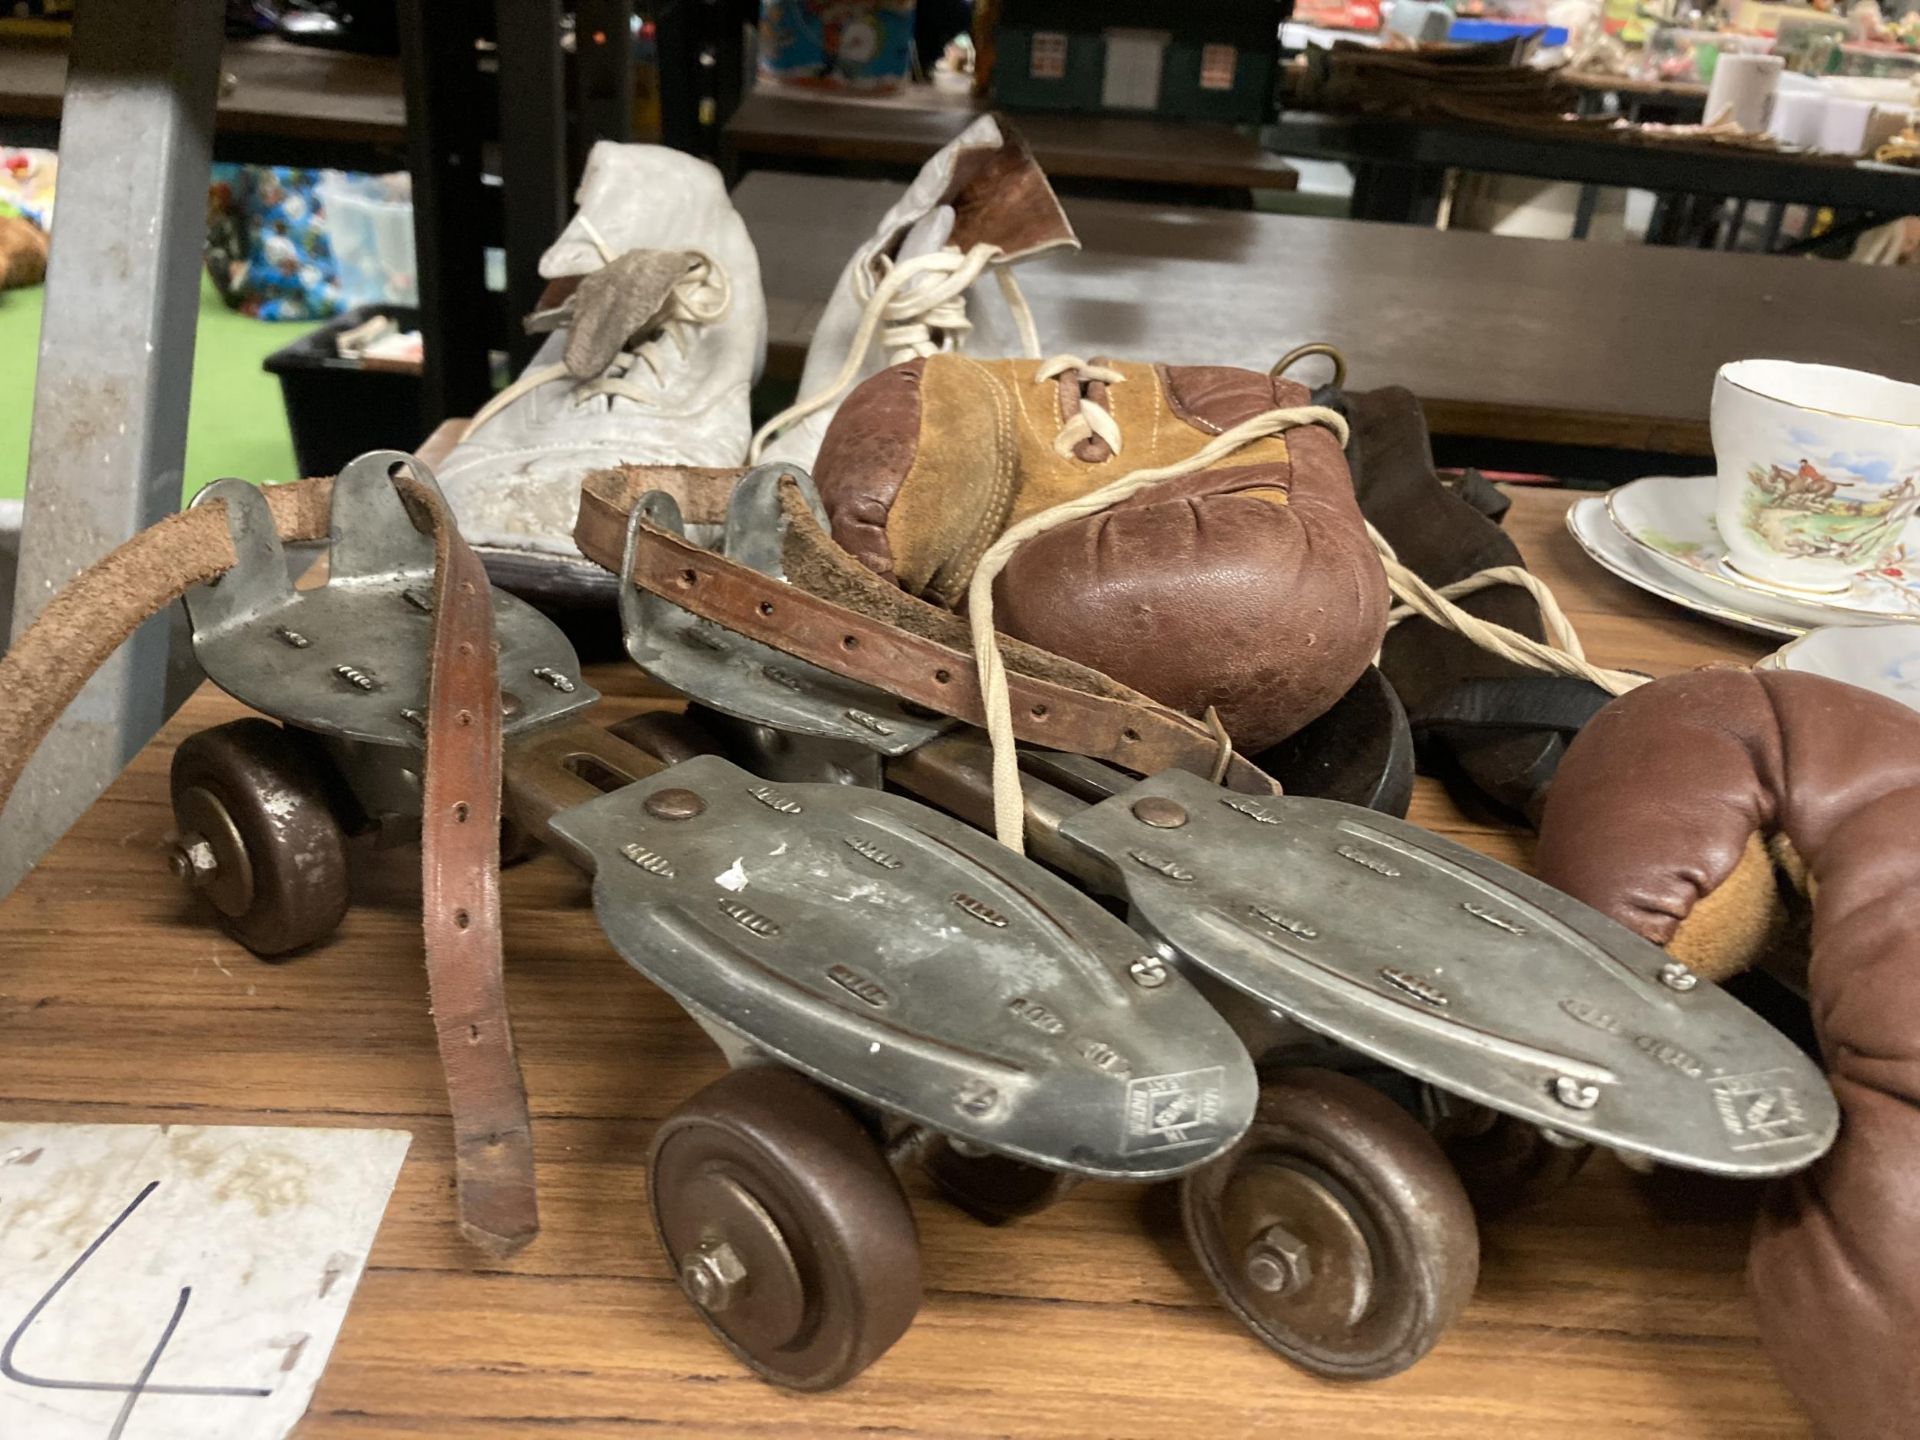 A COLLECTION OF VINTAGE SPORTING EQUIPMENT TO INCLUDE BOXING GLOVES, ROLLER SKATES, ICE SKATES AND - Image 6 of 7